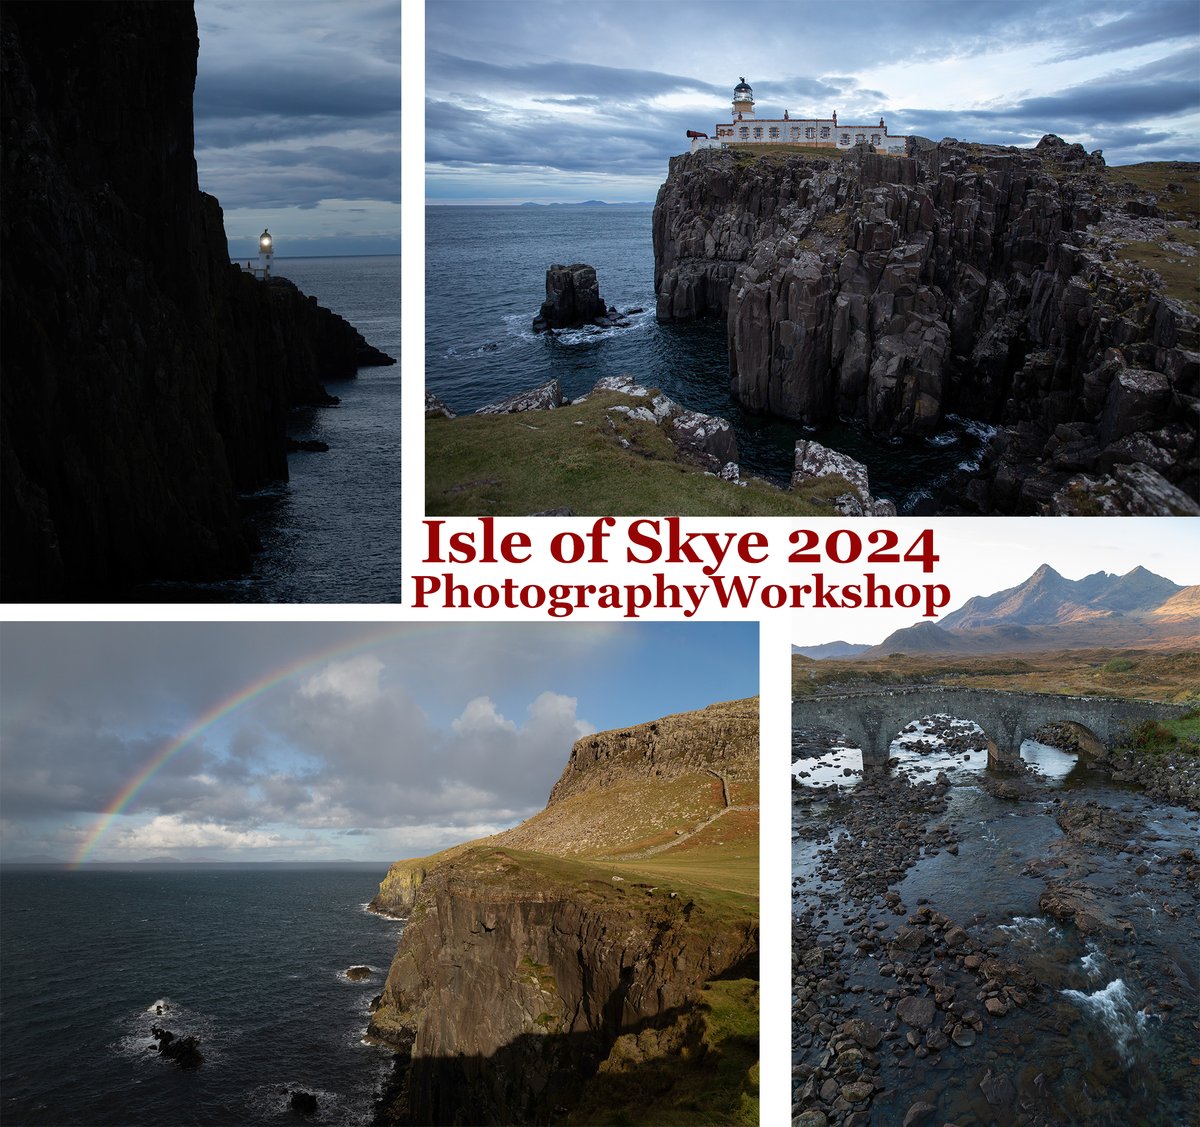 The stunningly beautiful Isle of Skye, I'll be running a workshop there again next year - 28th-31st October 2024. If you're interested message or email me for more details and there could be an early bird discount 😀 info@phil-morley.co.uk - phil-morley.co.uk/workshops #scotland